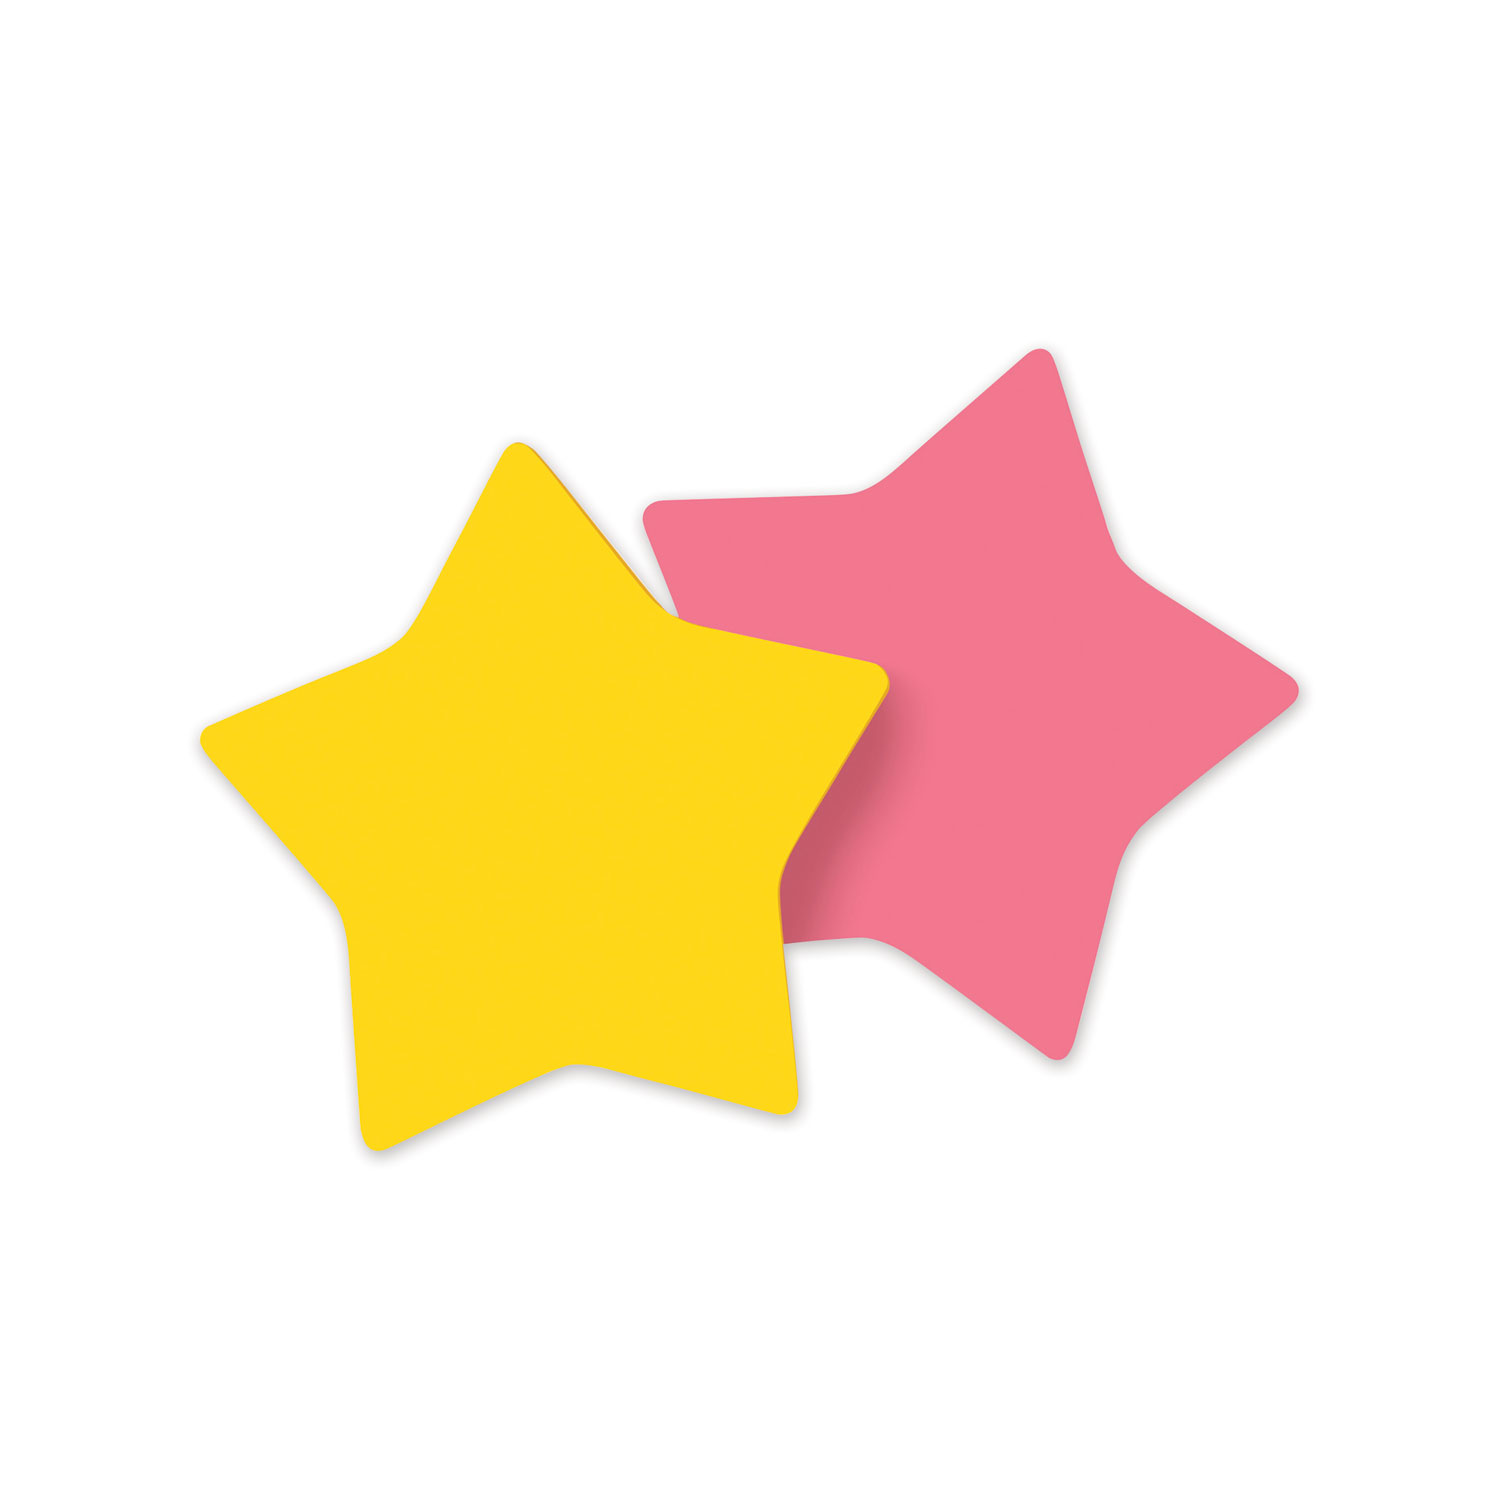  Post-it Notes 7350-STR Die-Cut Star Shaped Notepads, 2.6 x 2.6, Pink, Yellow, 75 Sheets/Pad, 2 Pads/Pack (MMM70005114114) 